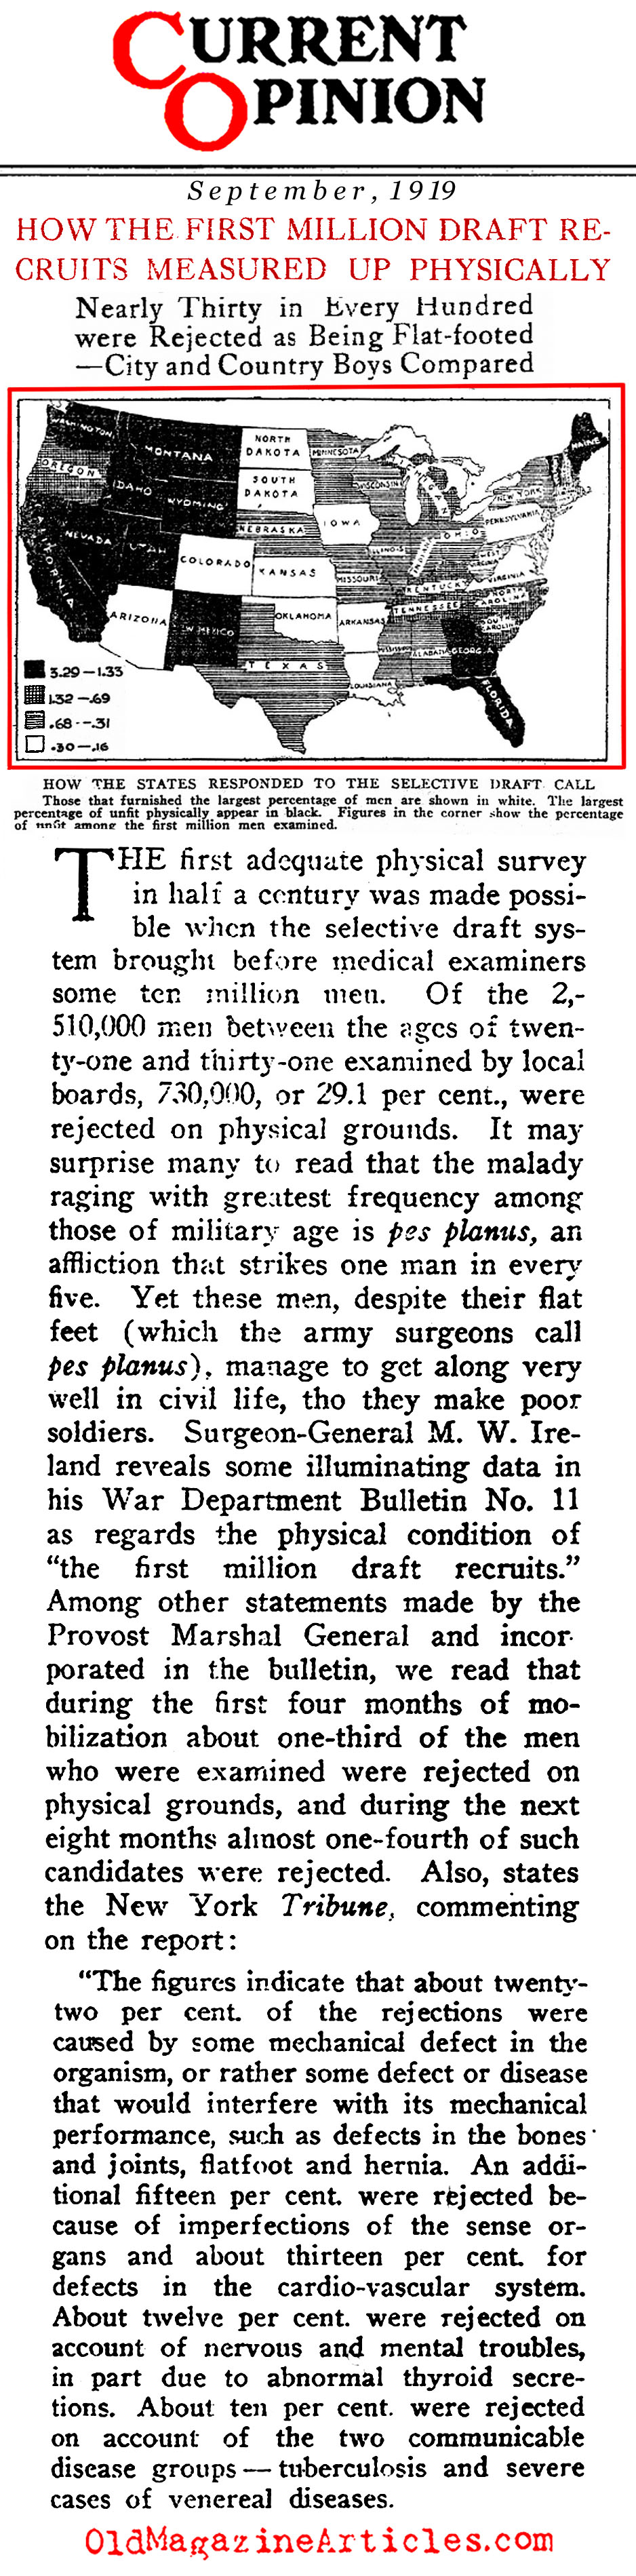 The Suitability of the First One Million Draftees (Current Opinion, 1919)